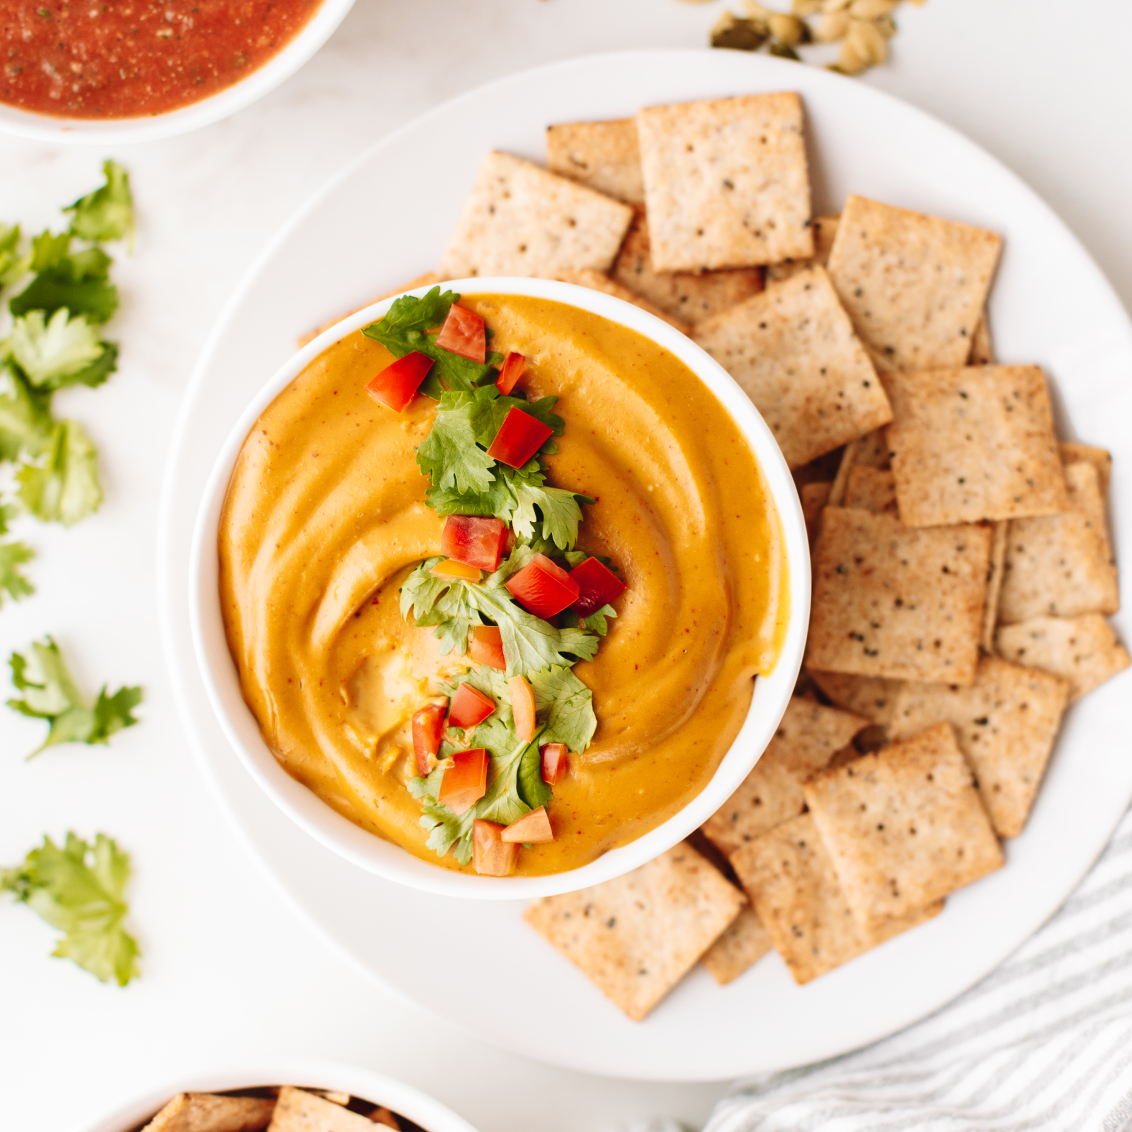 Vegan Cinco de Mayo dishes made easy with Almond Cow milk maker